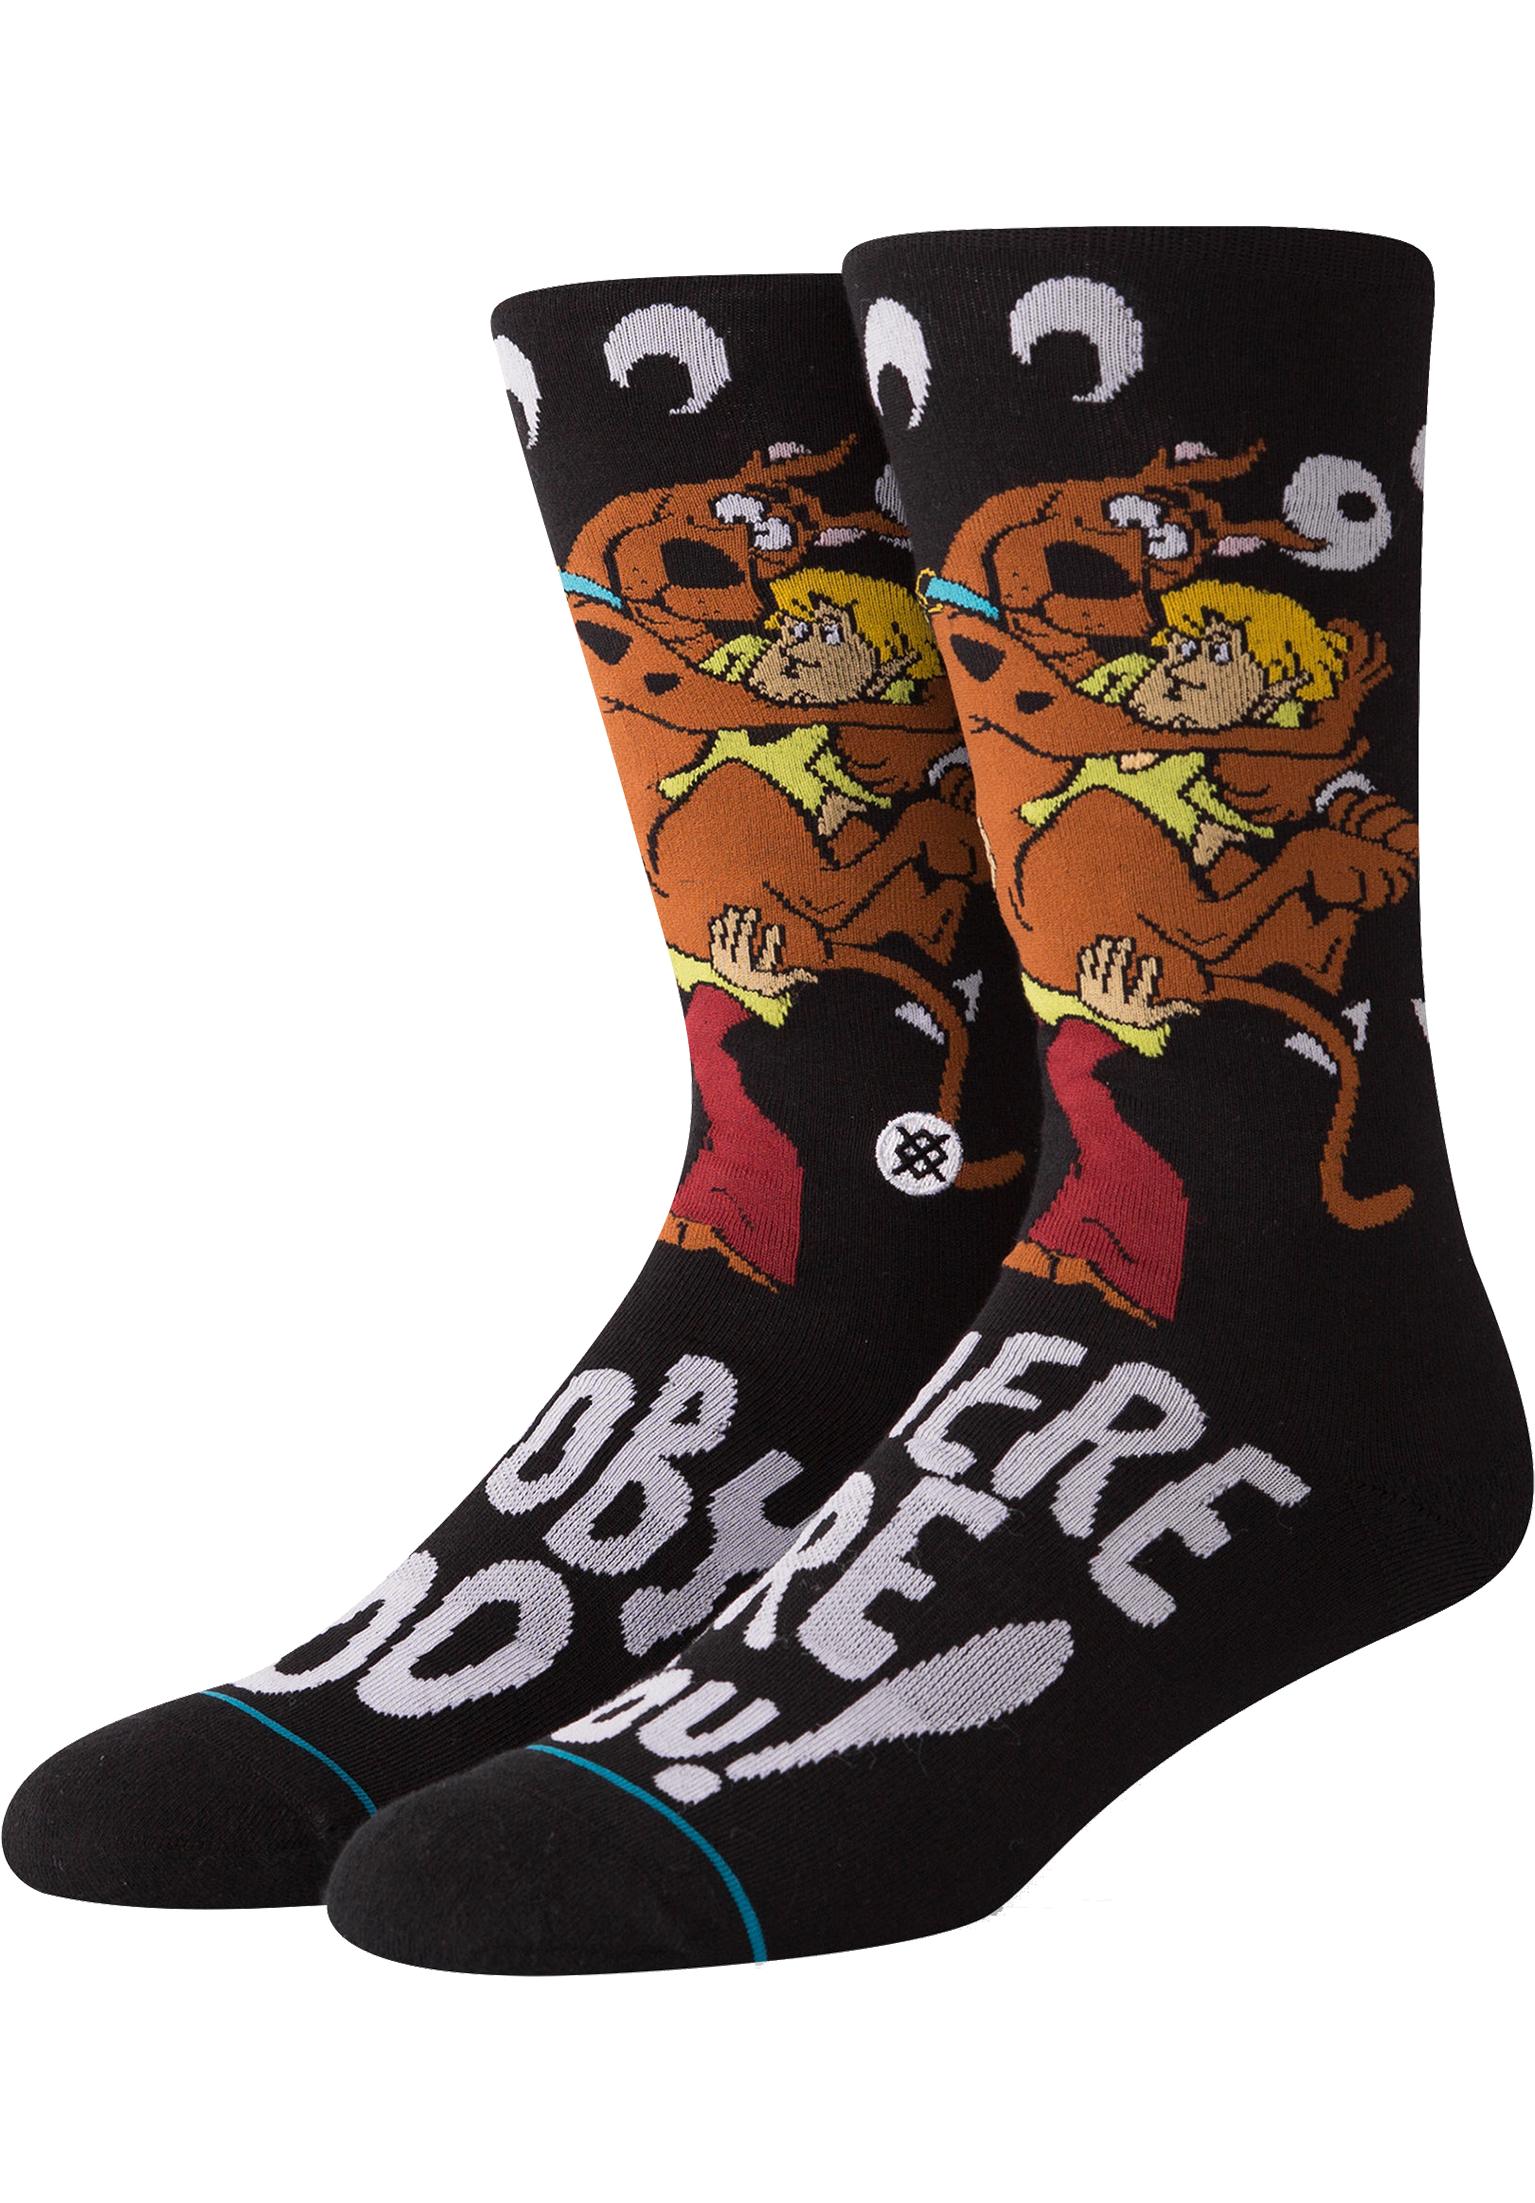 Titus_muenchen_stance-socken-where-are-you-black-0631556.jpg